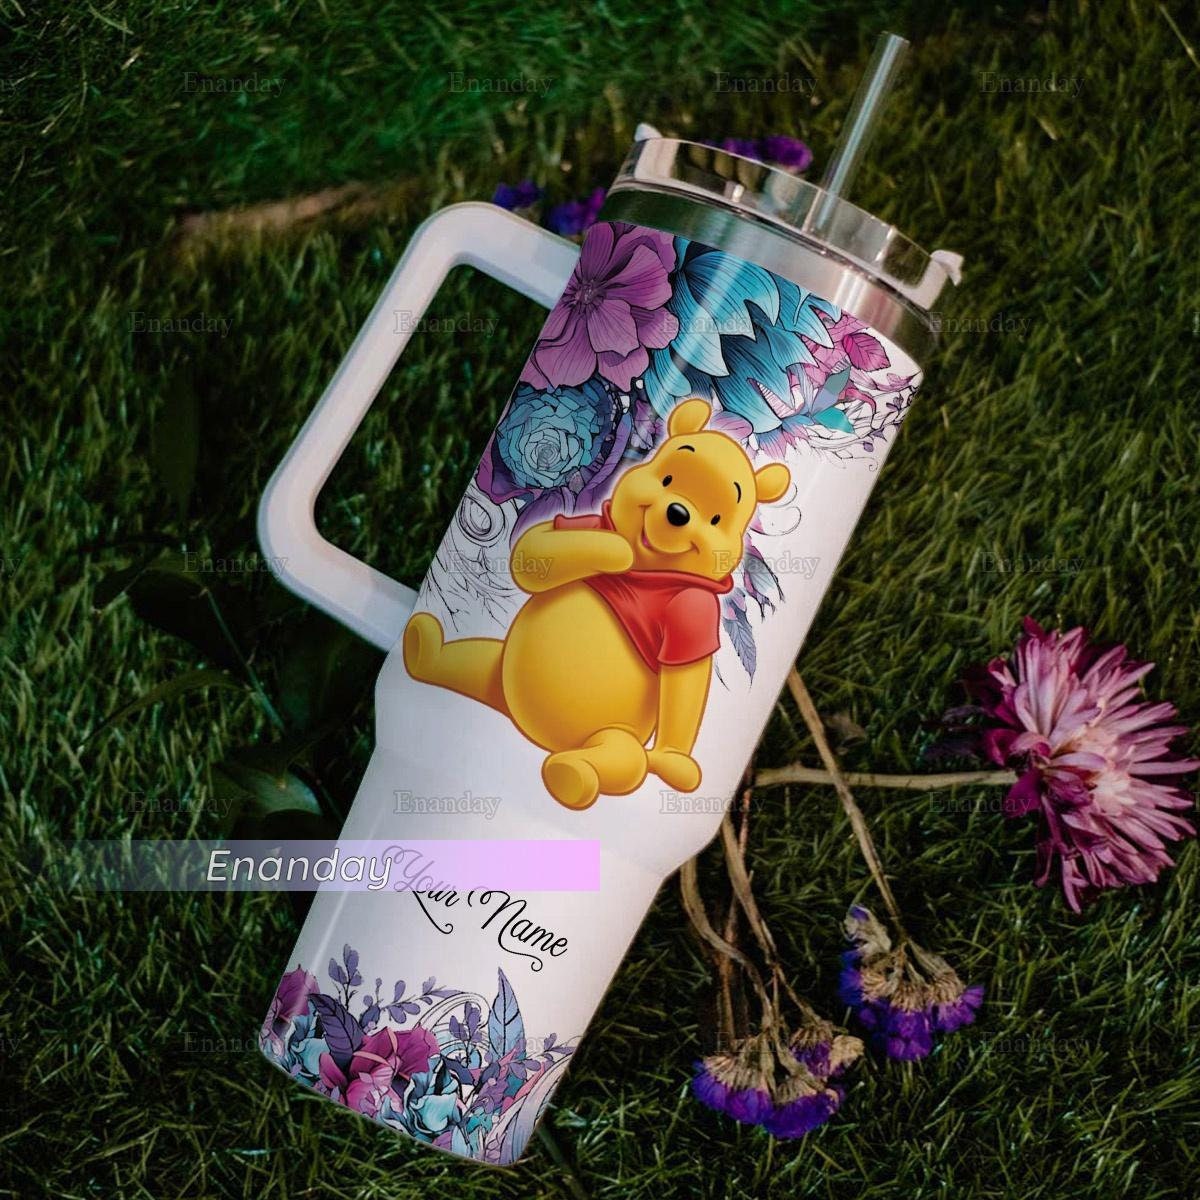 Just A Girl Who Loves Pooh 40oz Tumbler